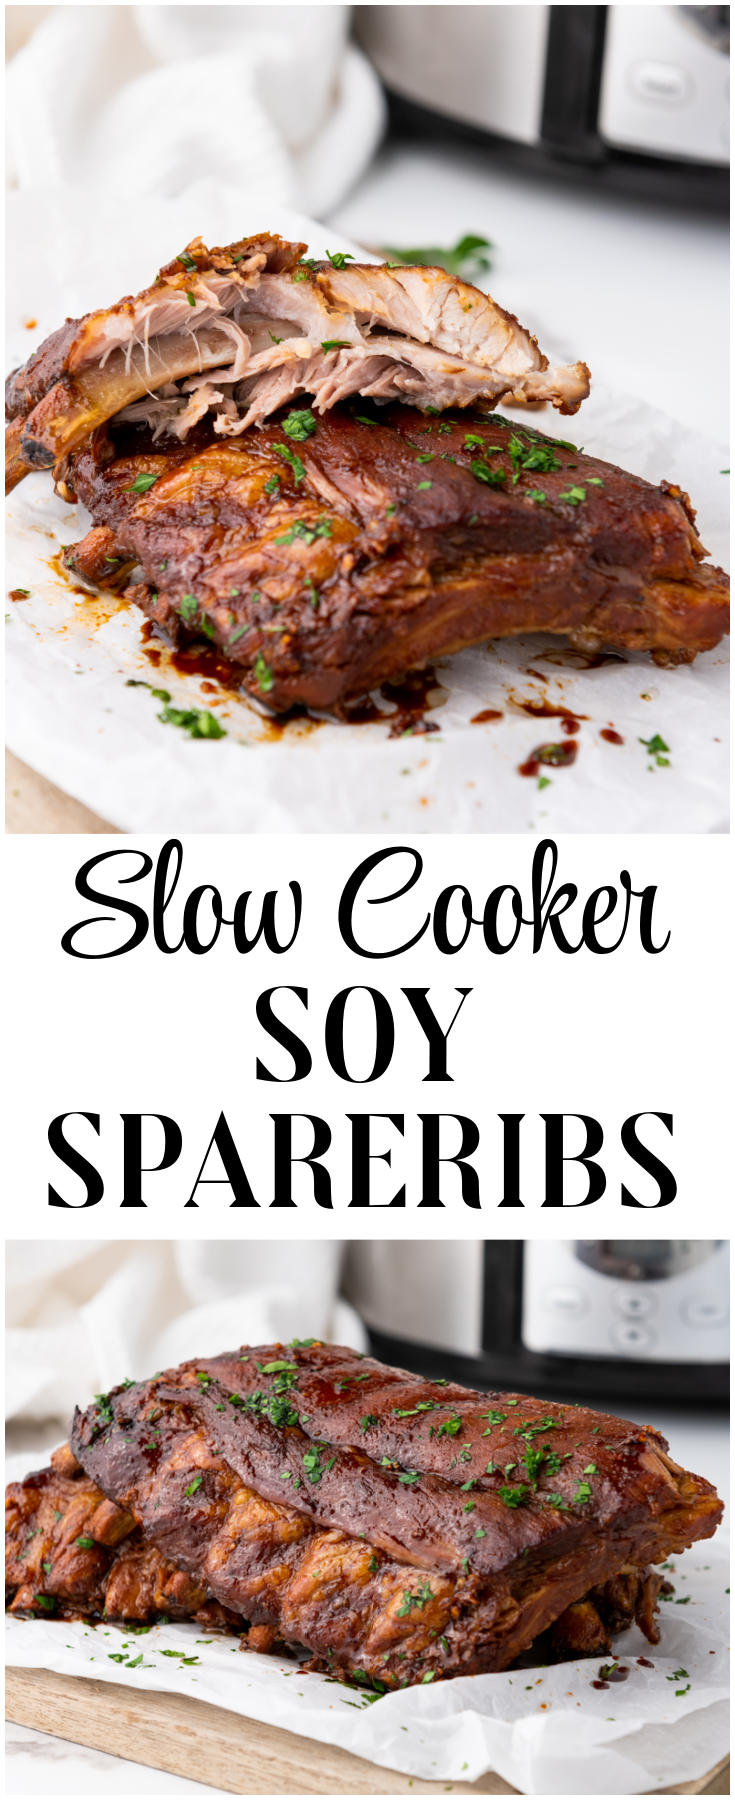 Slow Cooker Soy Spareribs come together easily with a handful of simple ingredients that result in the most addictive, flavorful ribs you'll ever try! #pork #spareribs #soy #slowcooker #crockpot